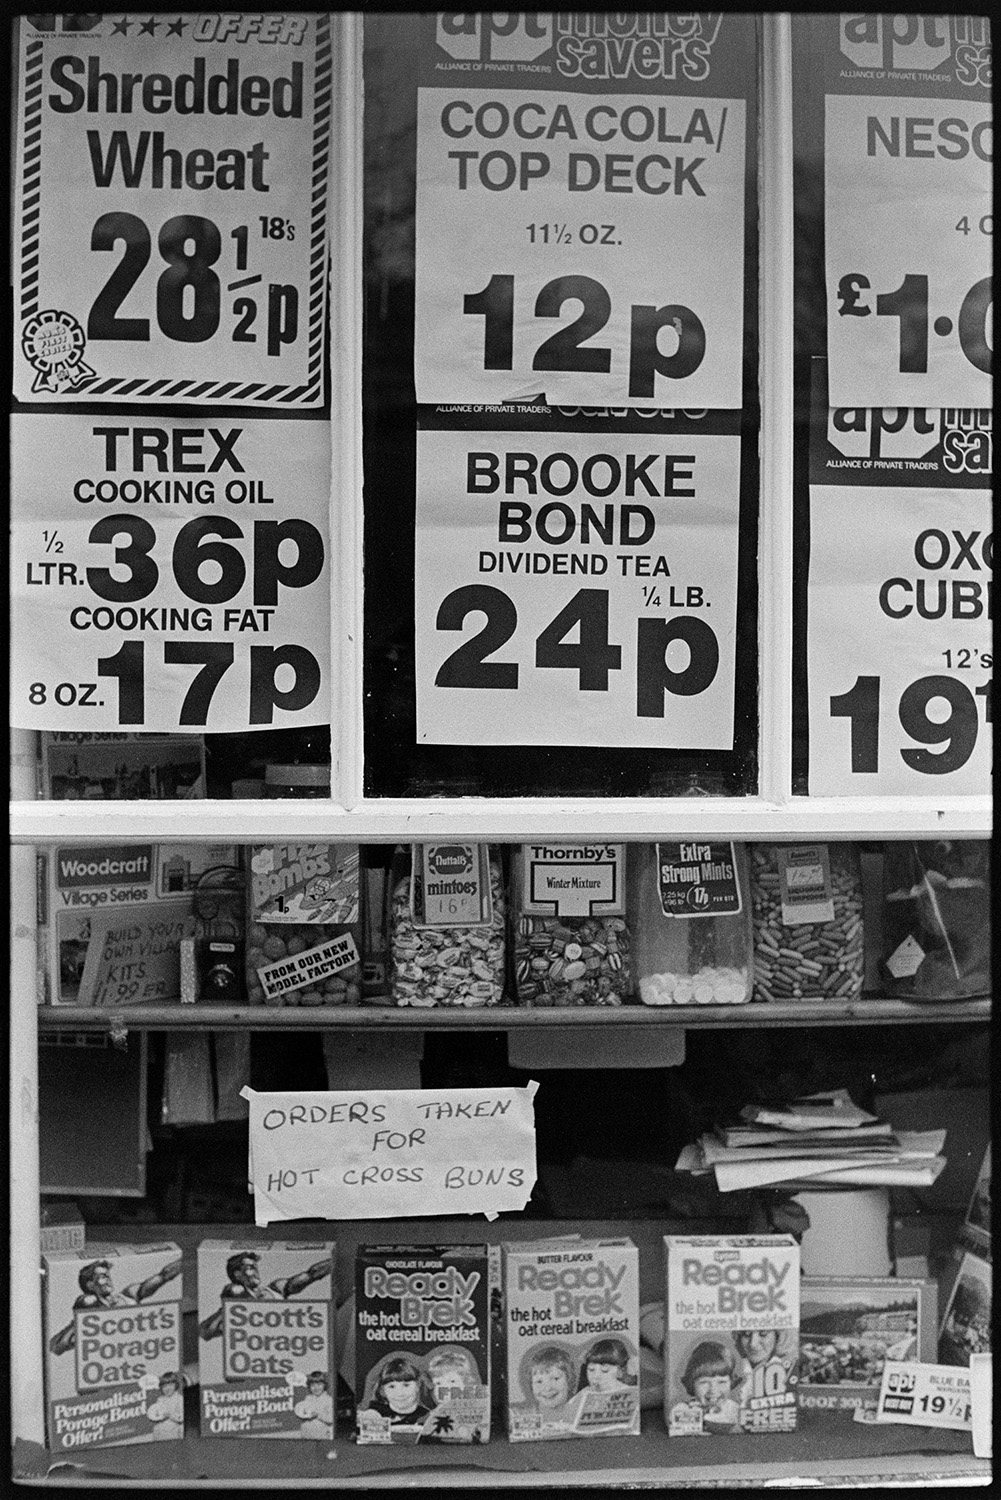 Grocery shop window with price signs and notice, hot cross buns. 
[The shop front window of London House Stores in Fore Street, Dolton. Posters advertising shredded wheat, coca cola and cooking oil, amongst other goods, are stuck in the window. Sweet jars, porridge boxes and a sign reading 'Orders Taken for Hot Cross Buns' are also visible.]